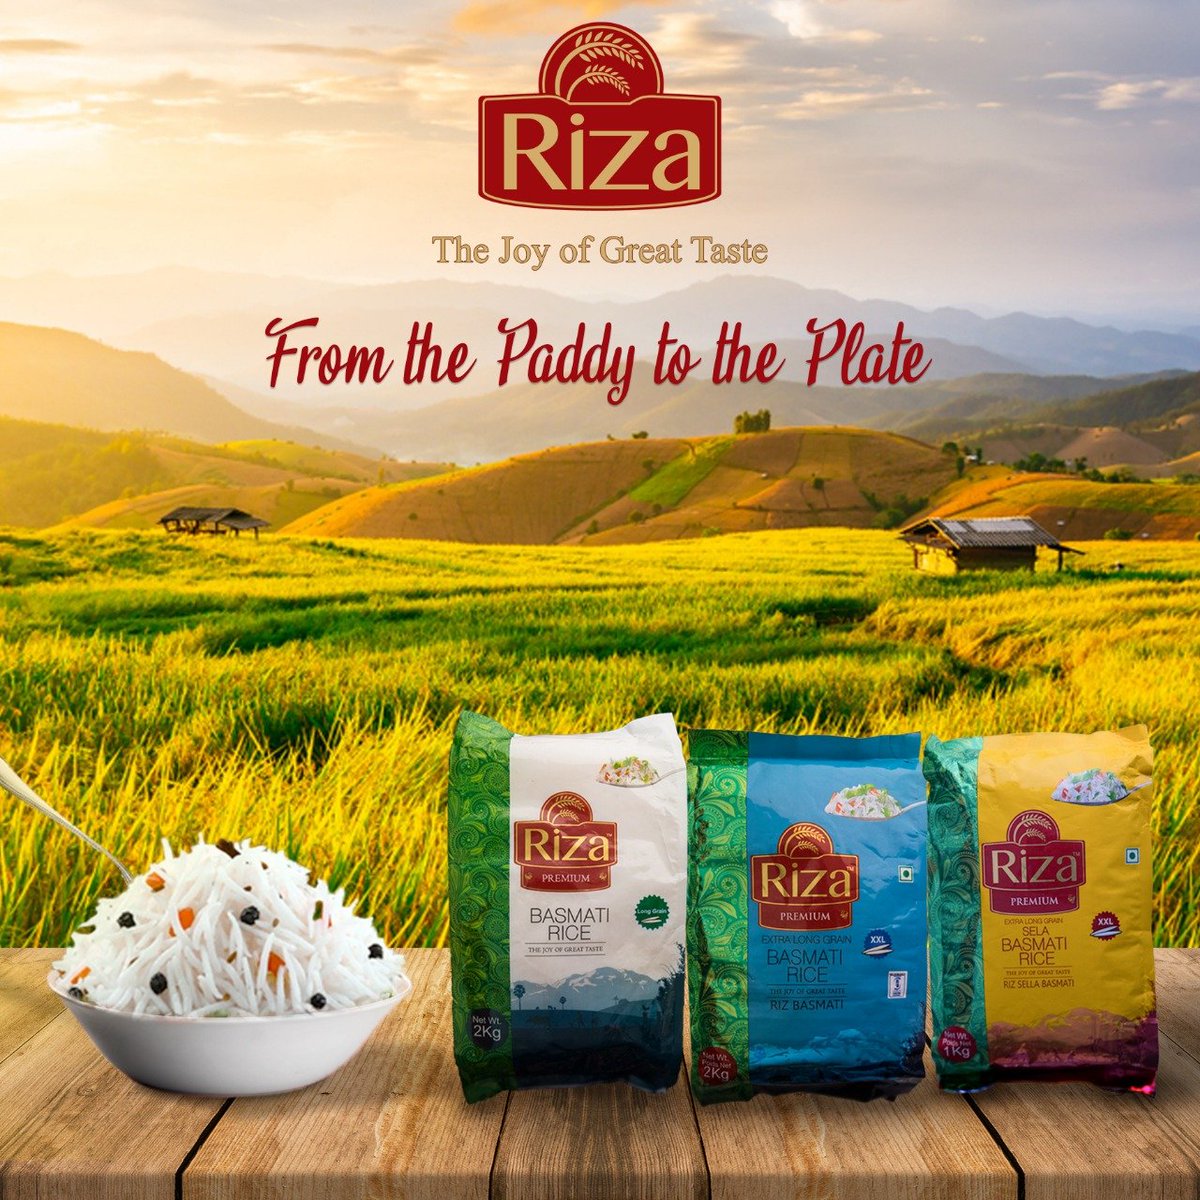 Try making Riza rice at home, be it a pulao or a biryani or a paella…we would love you to savour ‘The Joy of Great Taste’.
#Riza
#TheJoyOfGreatTaste
#FurahiDay
#RiceLovers
#HealthyFood
#Foodies